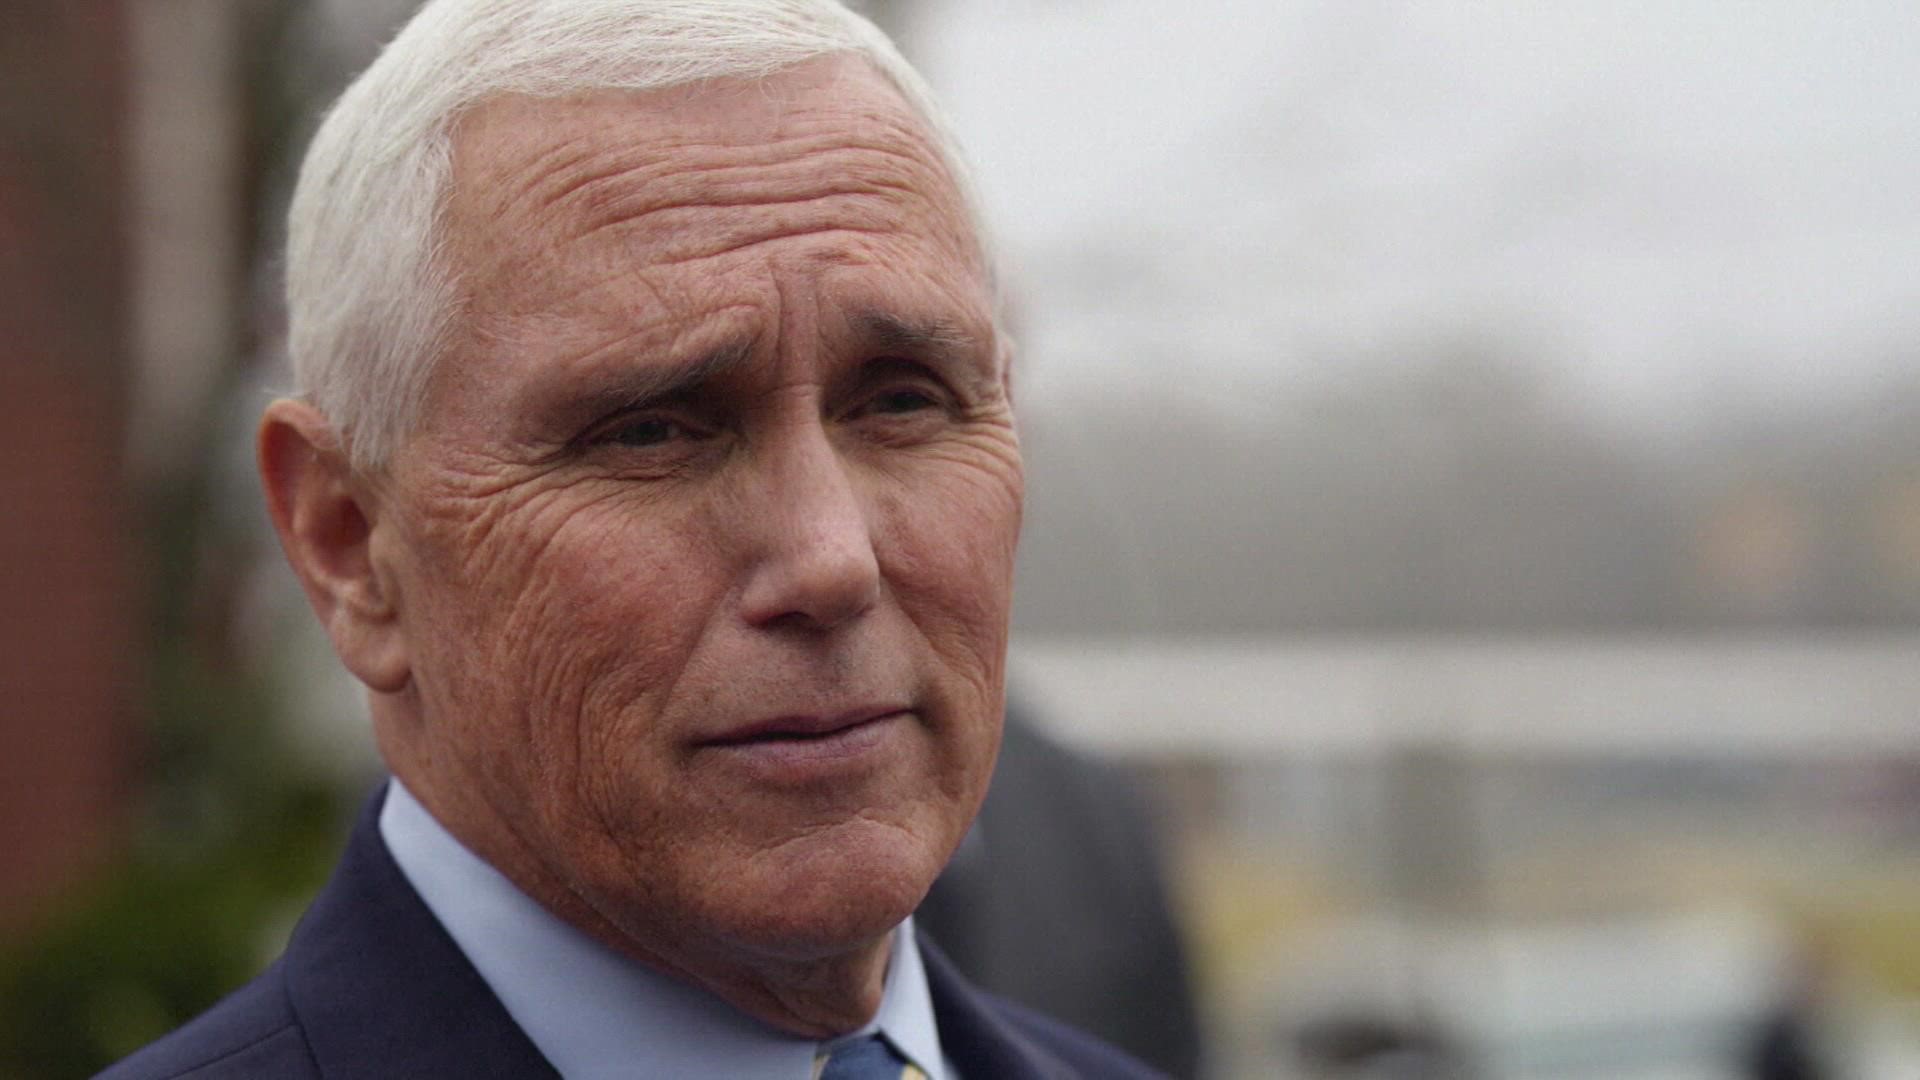 The former vice president decided to search for any classified documents he might have at his home in Indiana.